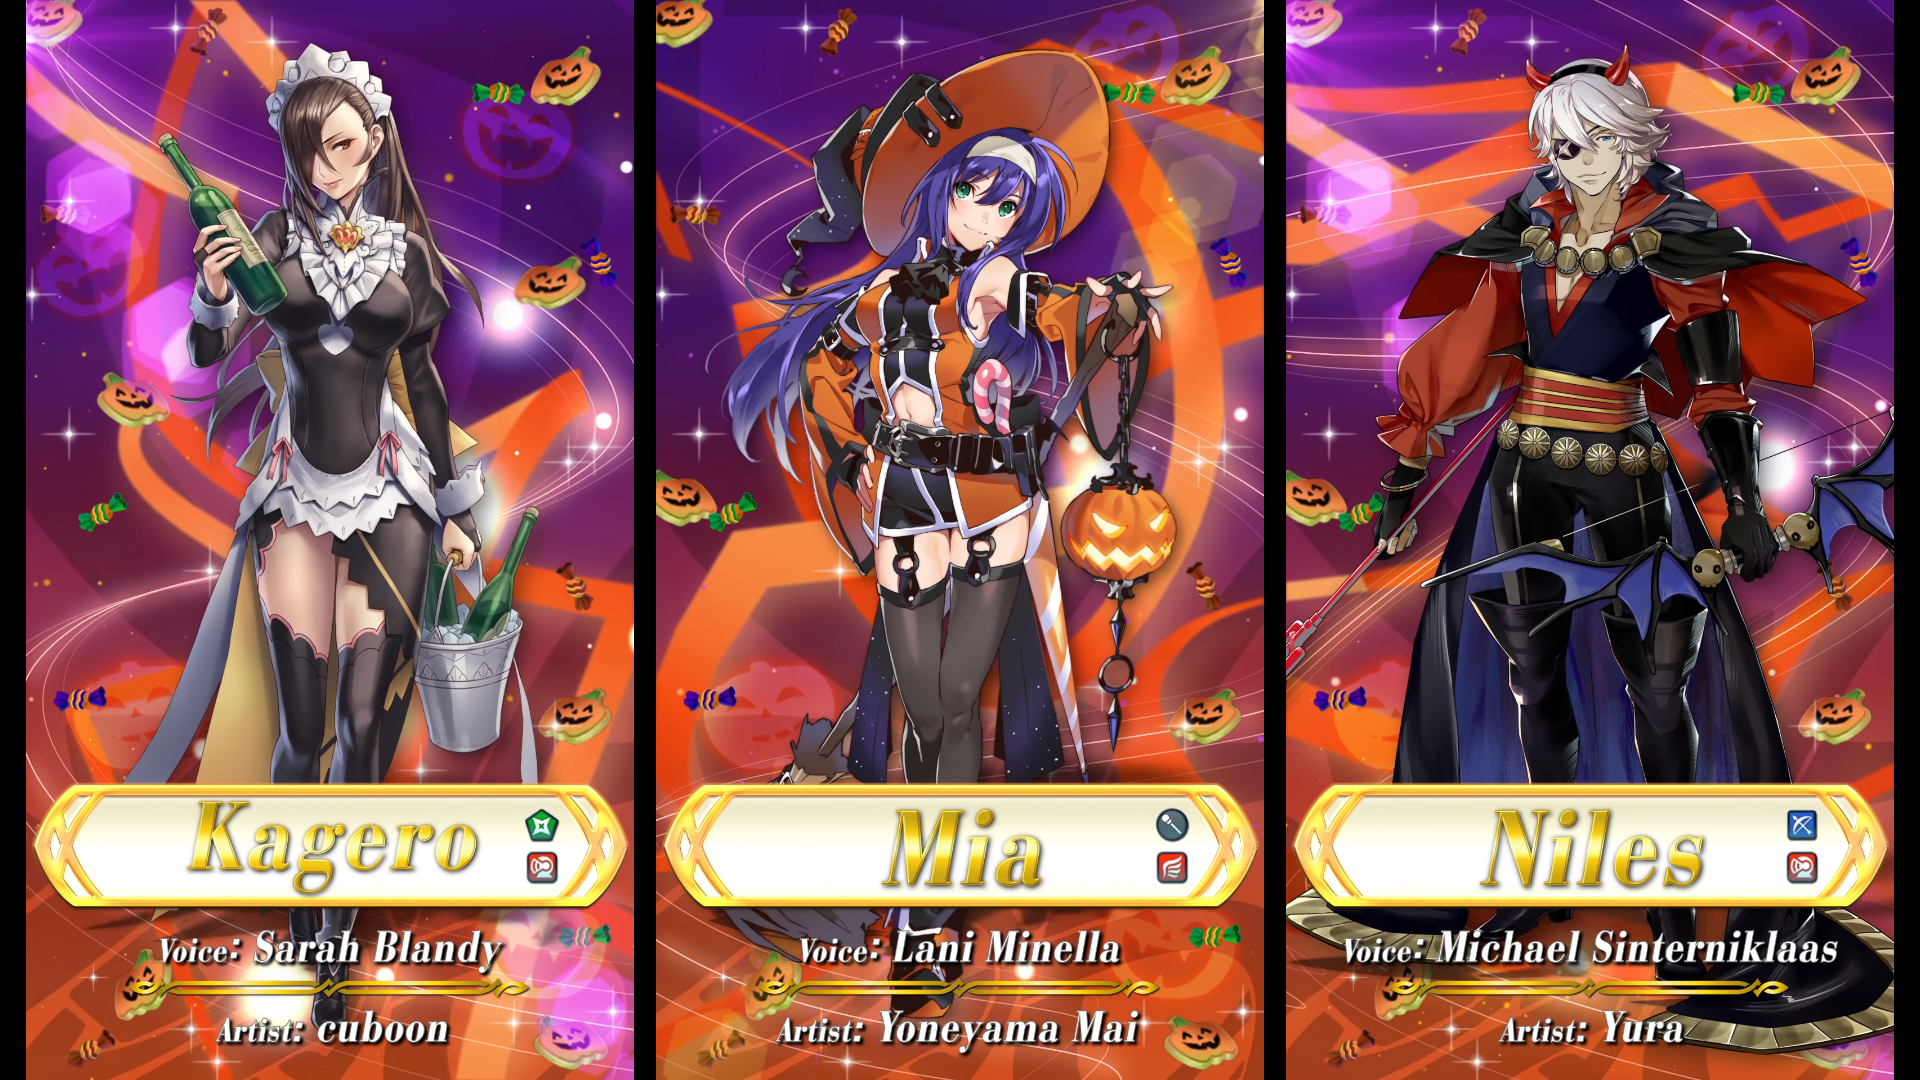 Halloween Has Arrived In Fire Emblem Heroes! 